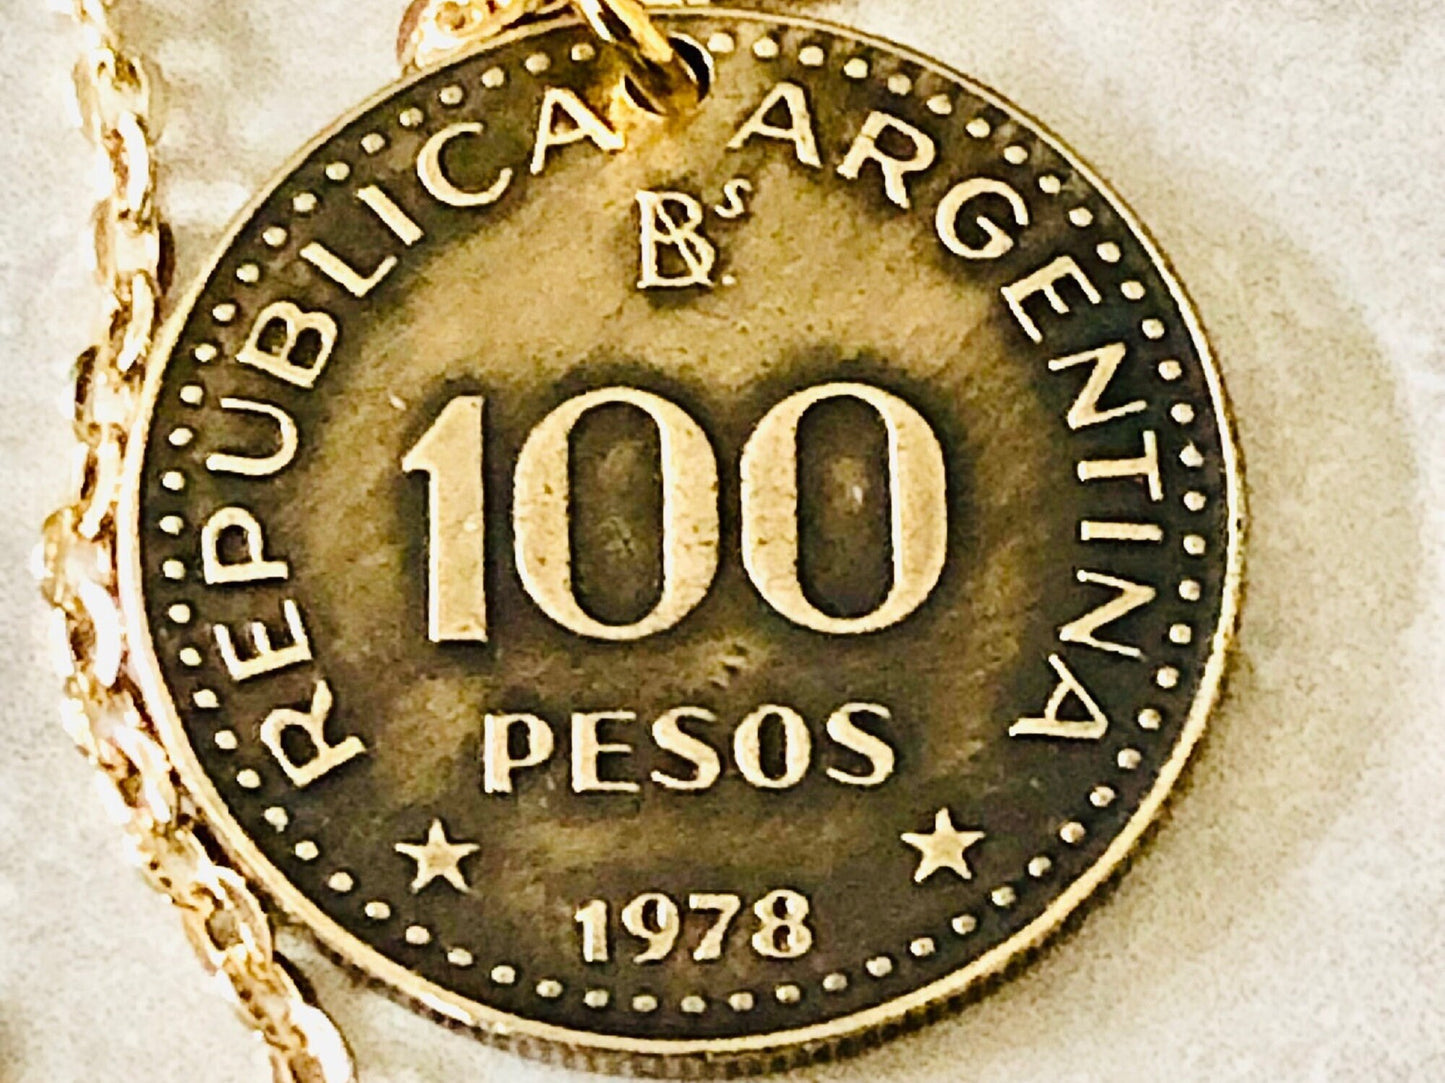 Argentina Coin Necklace 1978 Argentinian 100 Pesos Del Rio Personal Handmade Jewelry Gift Friend Charm For Him Her World Coin Collector